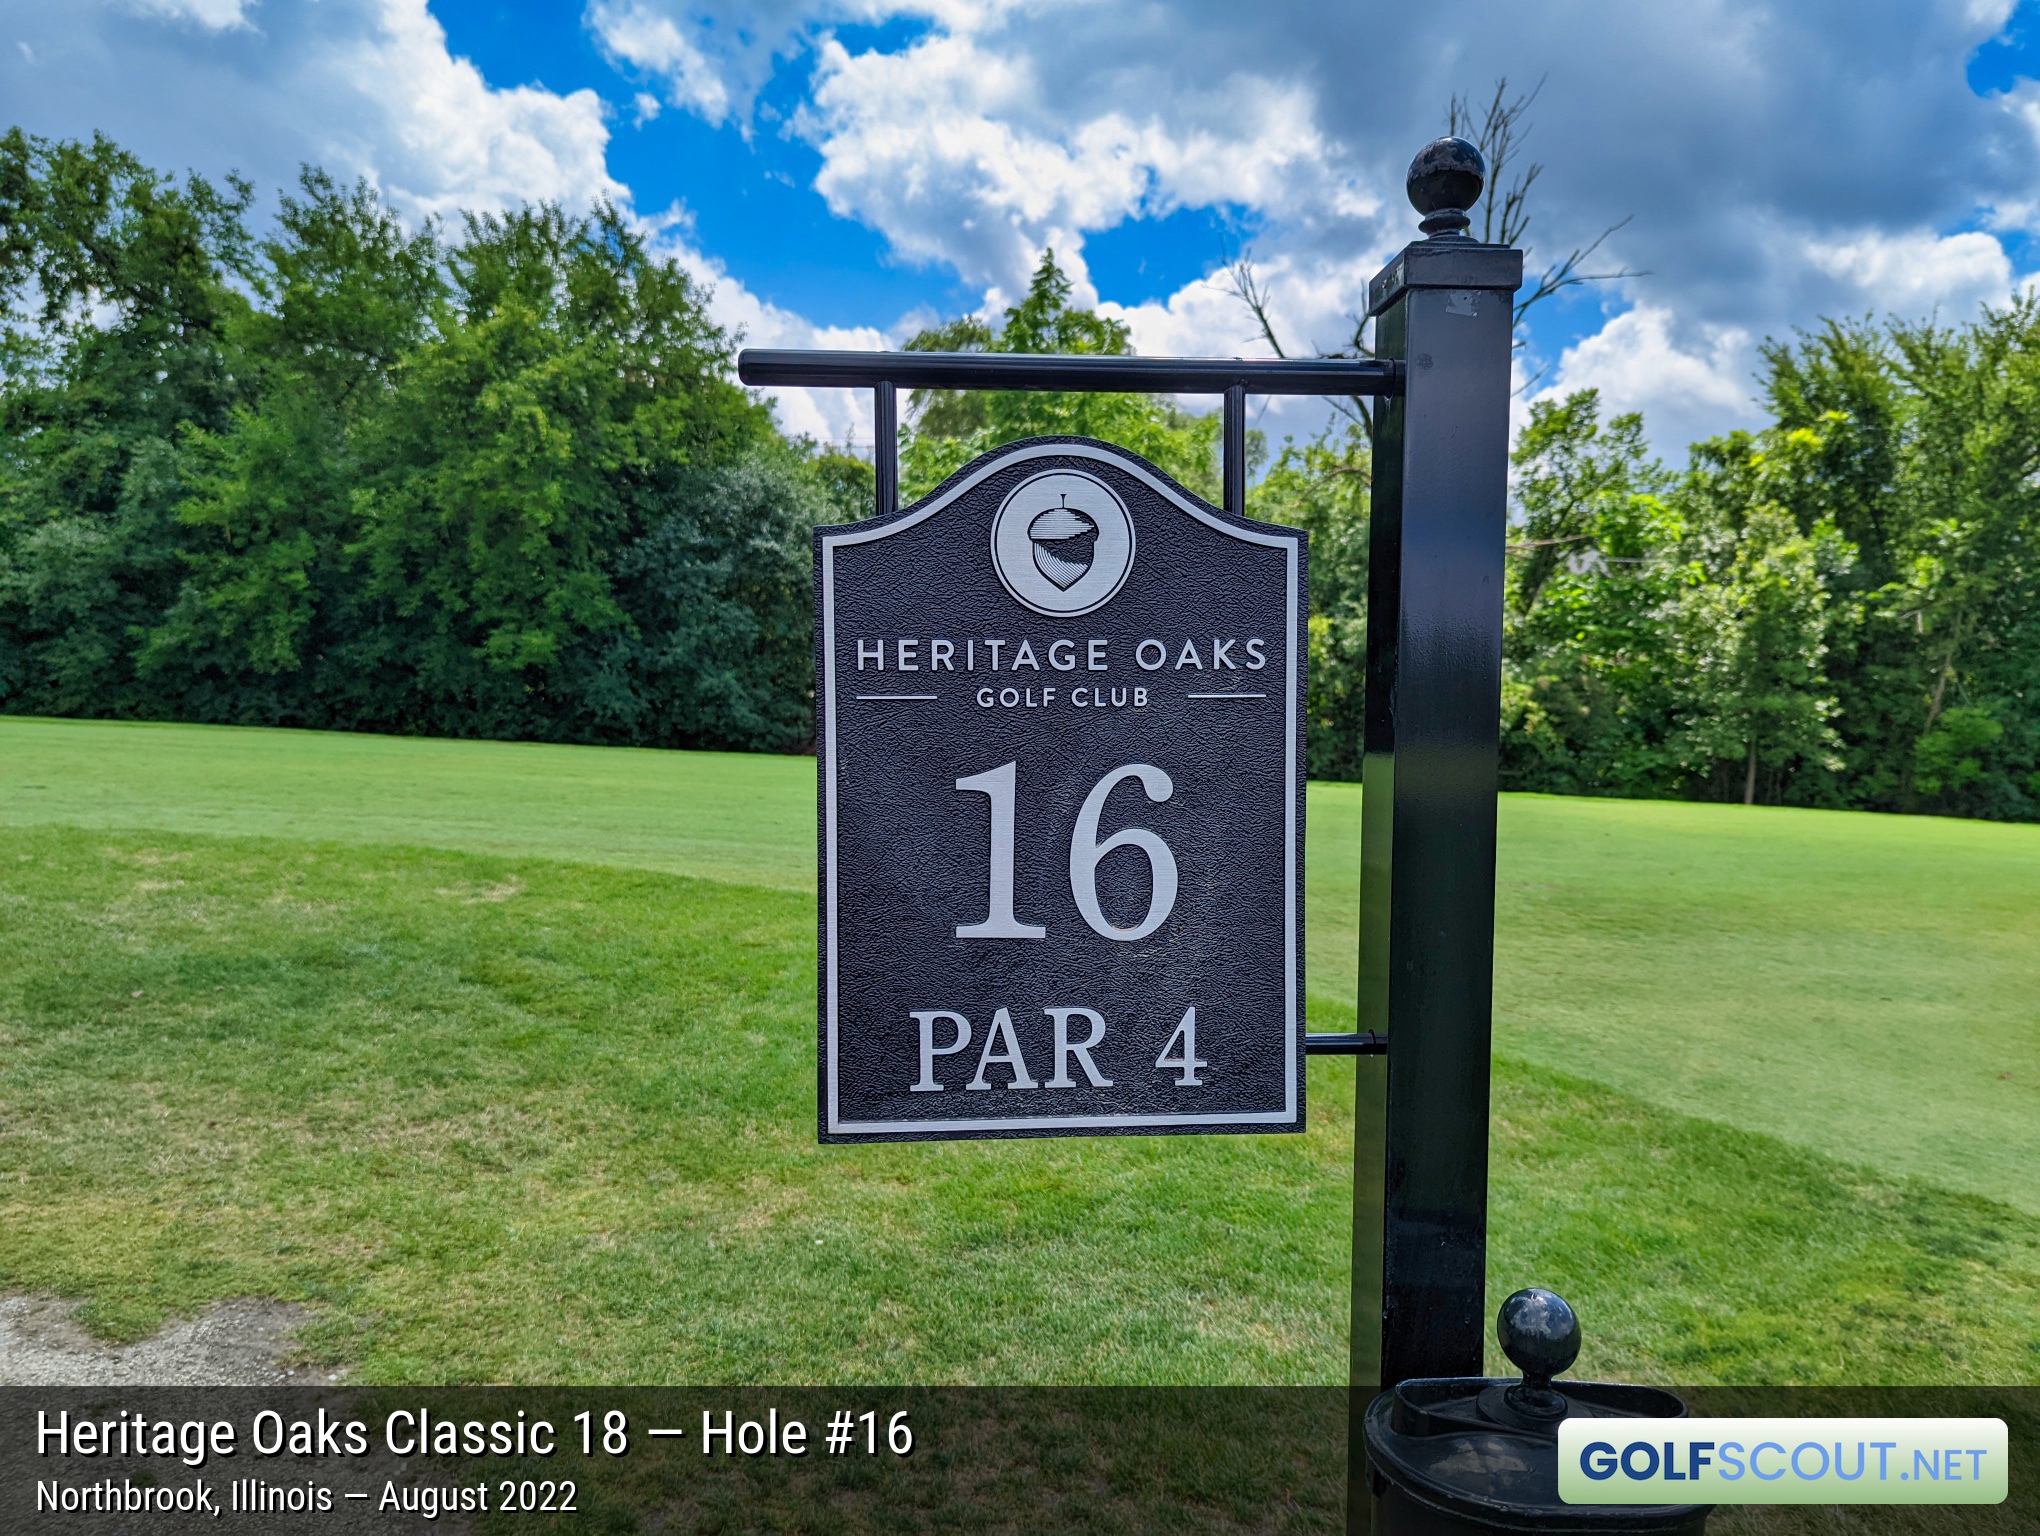 Photo of hole #16 at Heritage Oaks Golf Club - Classic 18 in Northbrook, Illinois. 